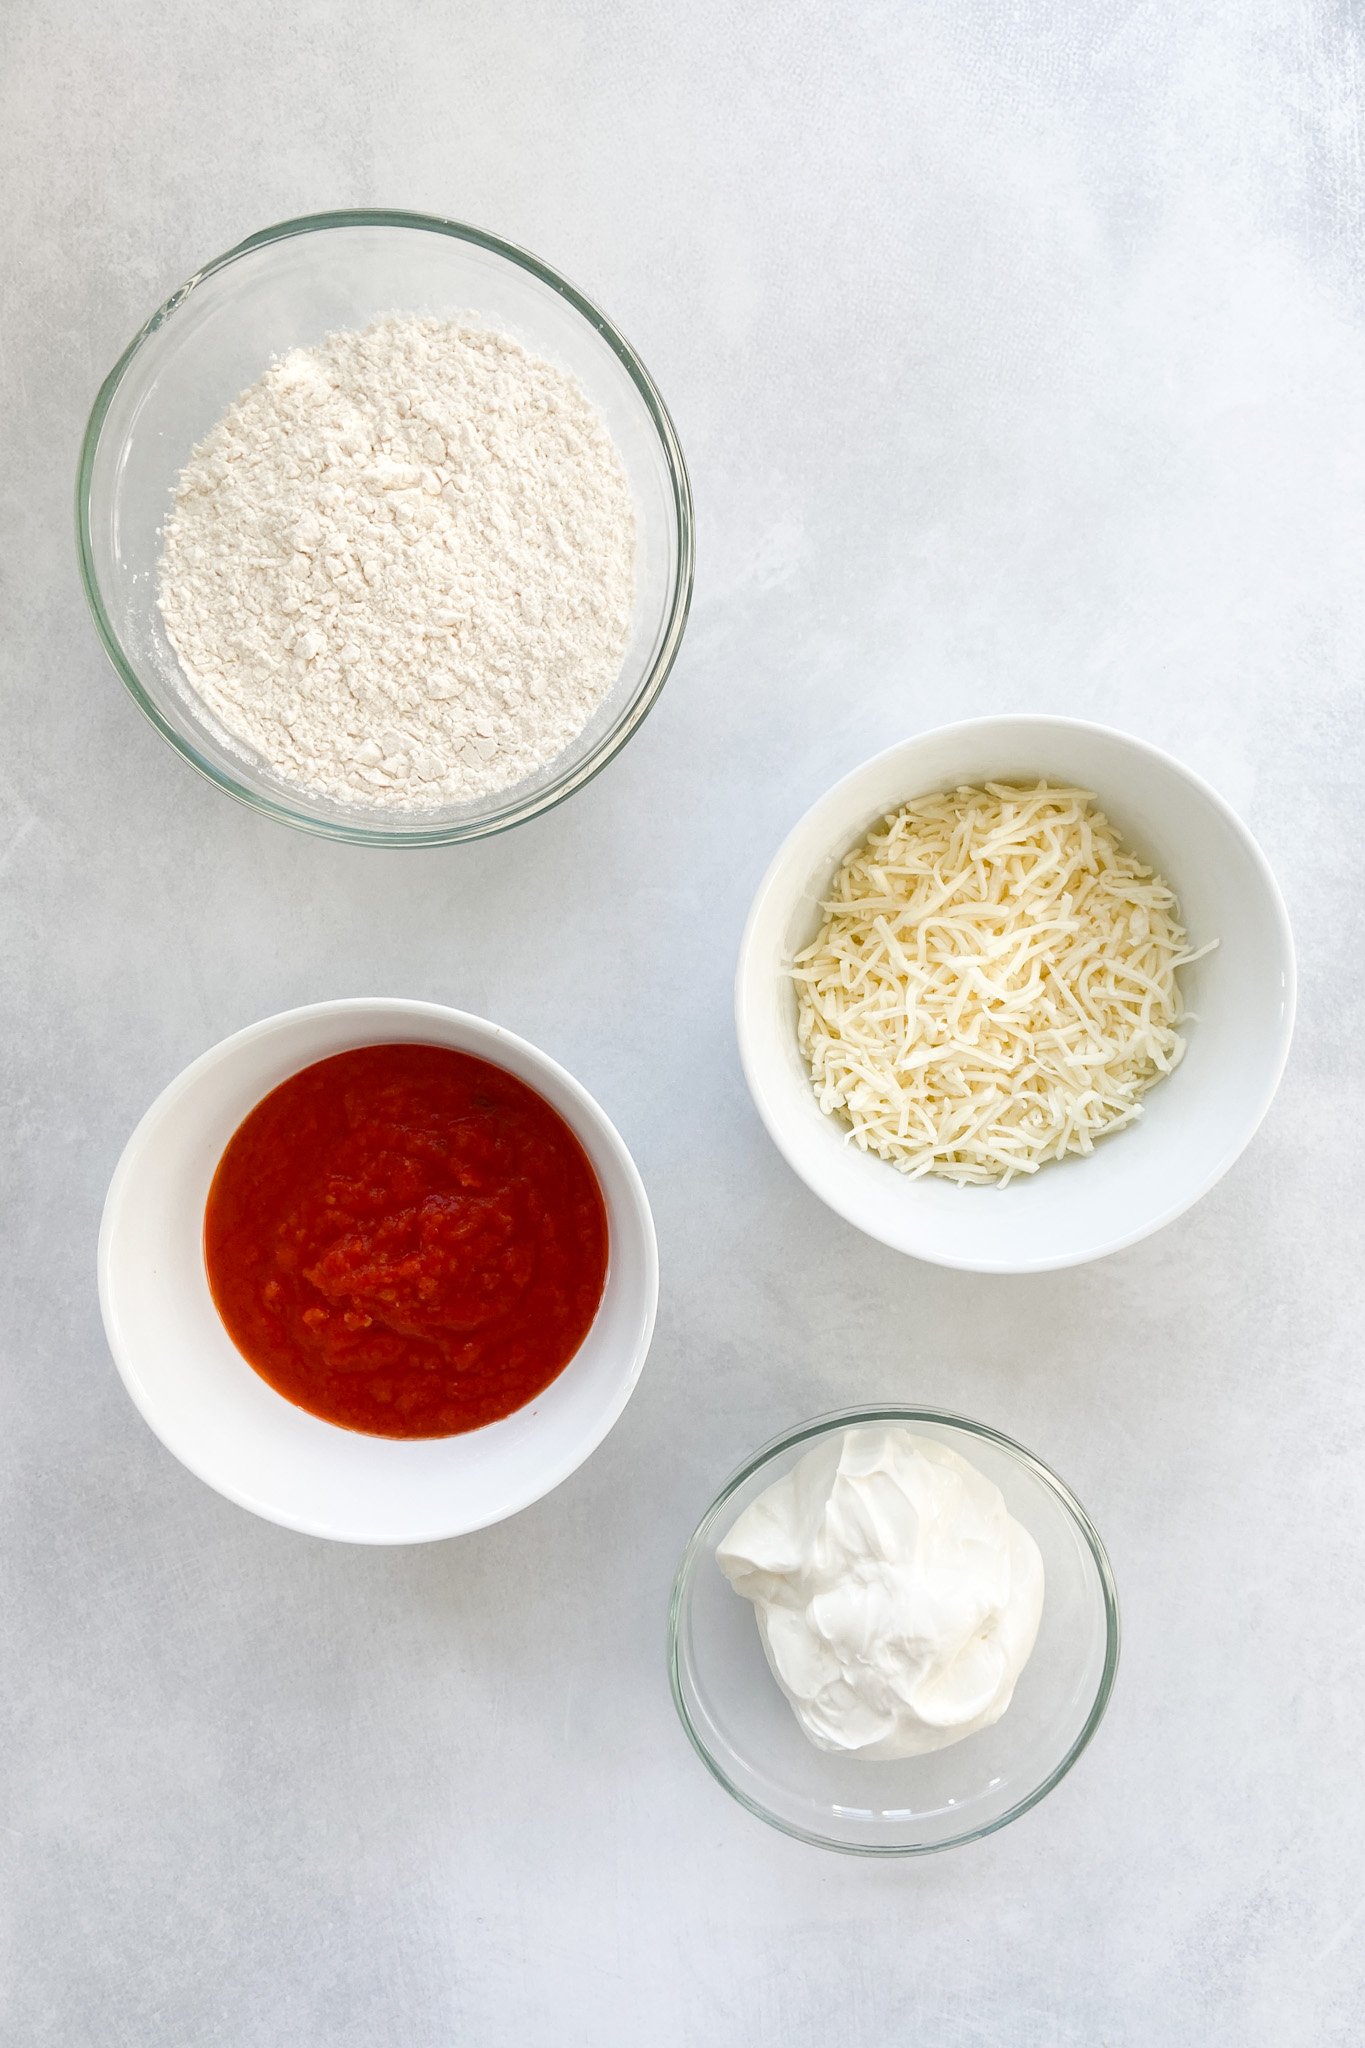 Ingredients to make homemade mini pizzas. Specifics provided in recipe card.